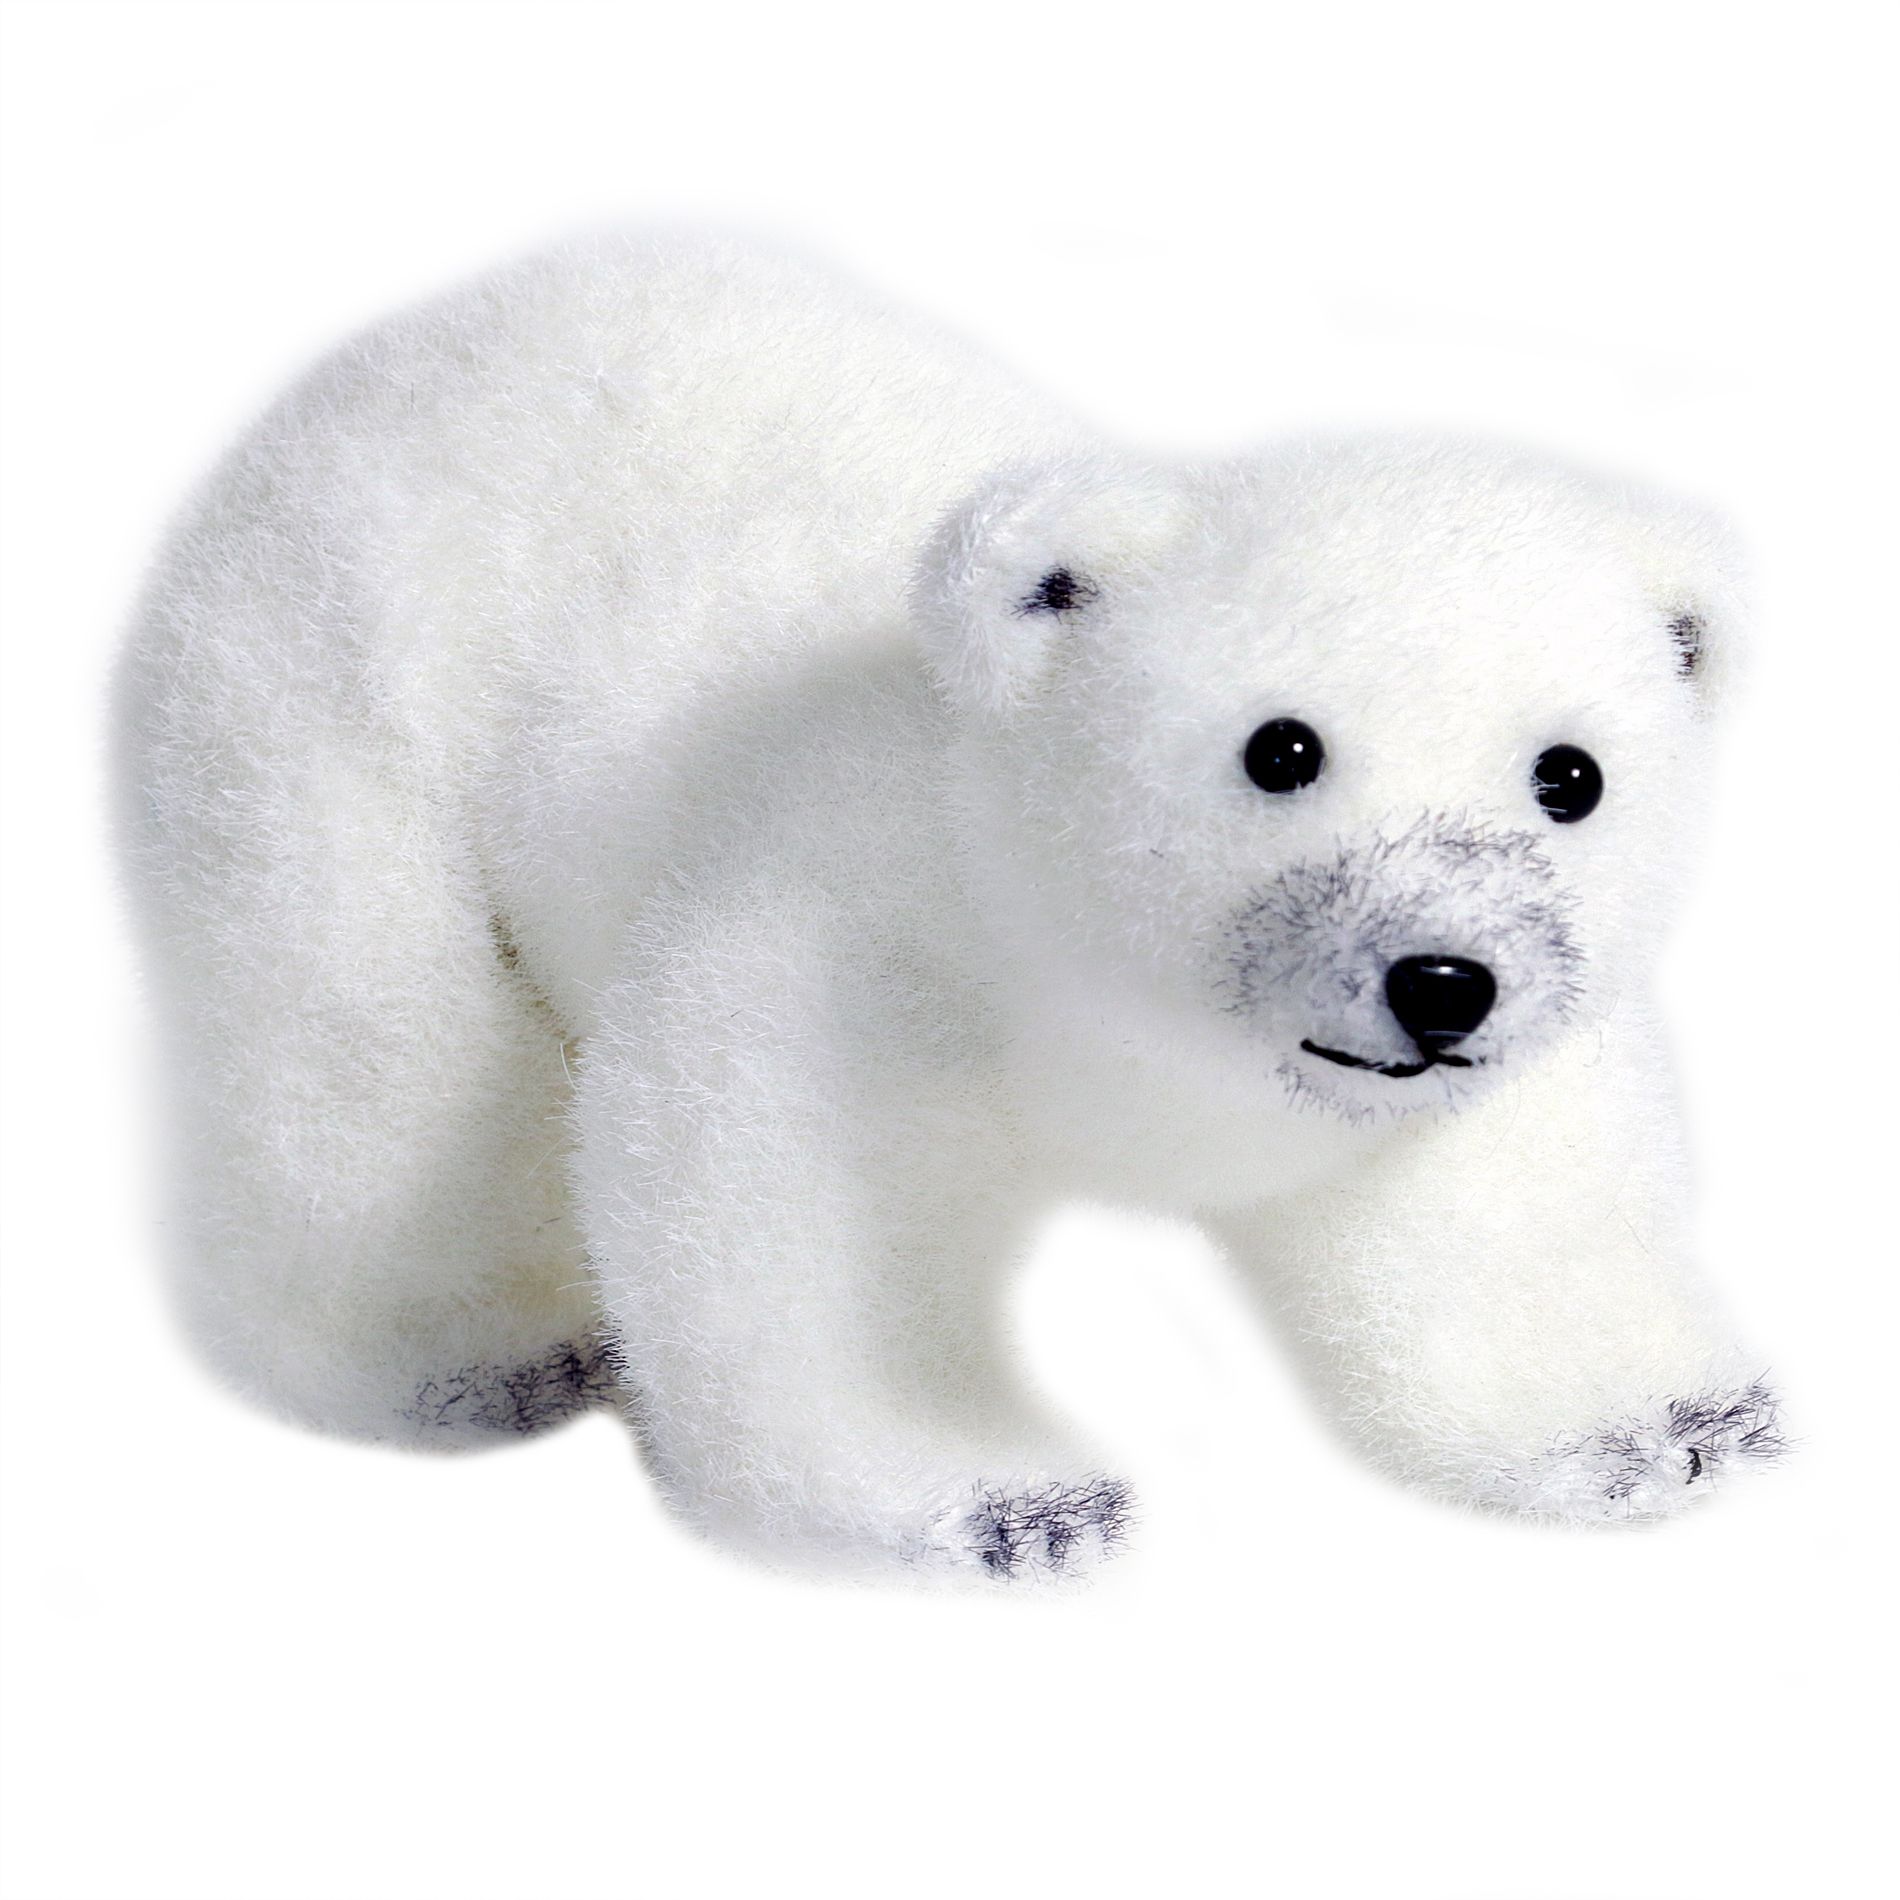 Peluche ours blanc - h. 29